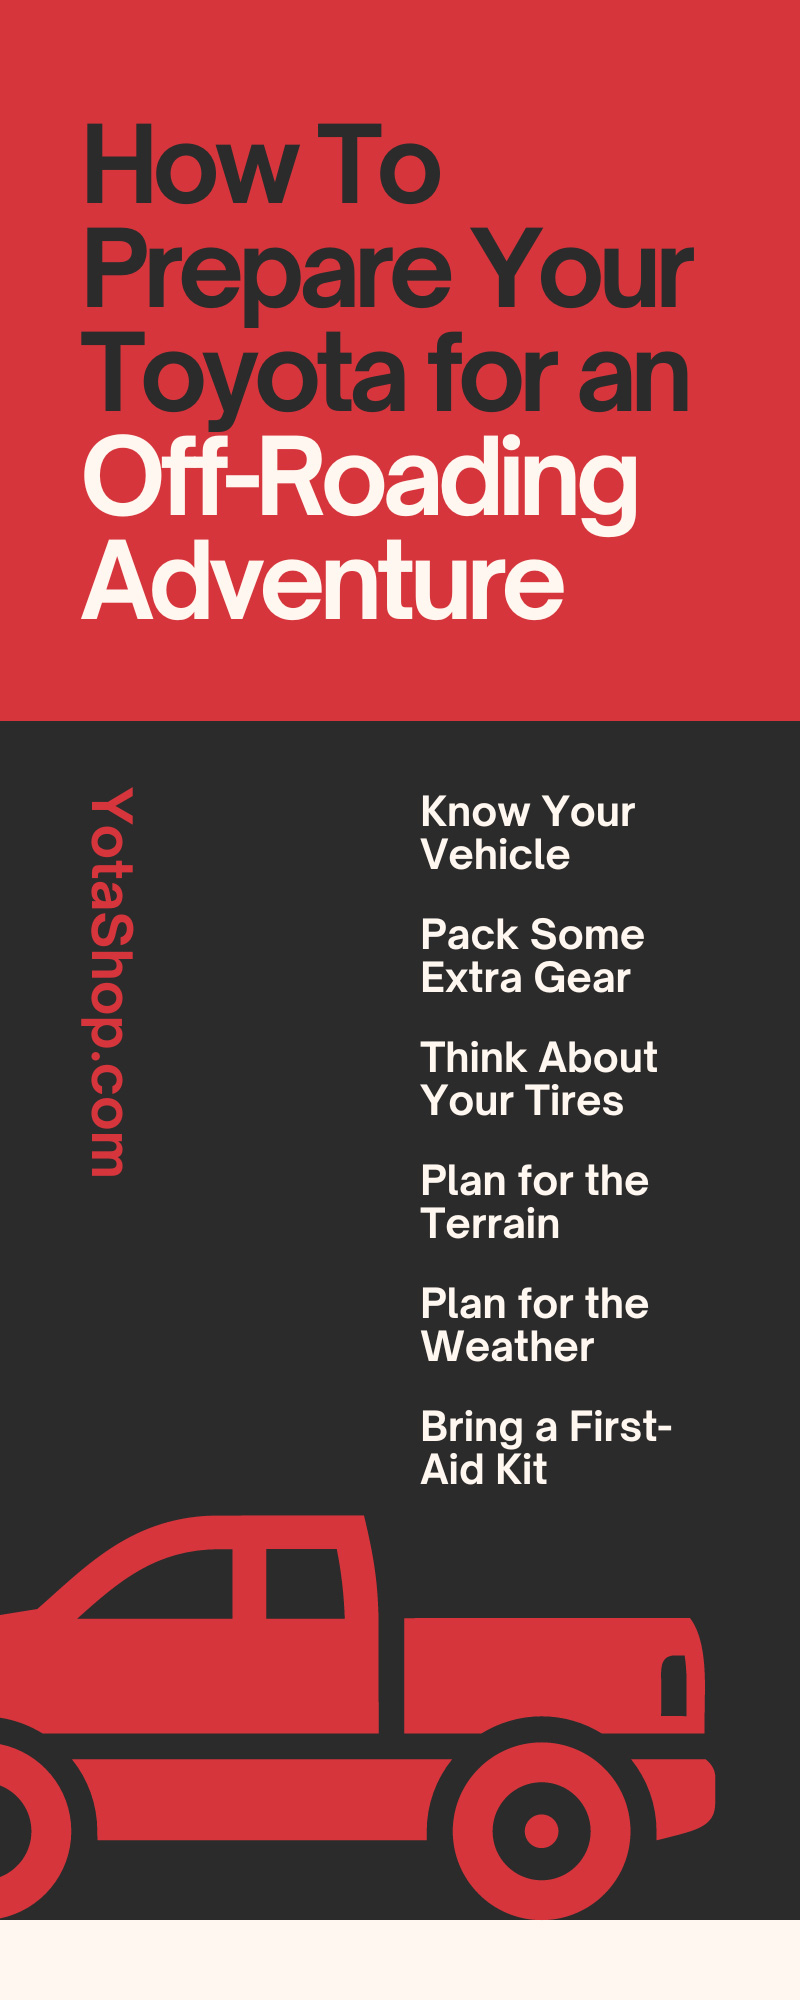 How To Prepare Your Toyota for an Off-Roading Adventure